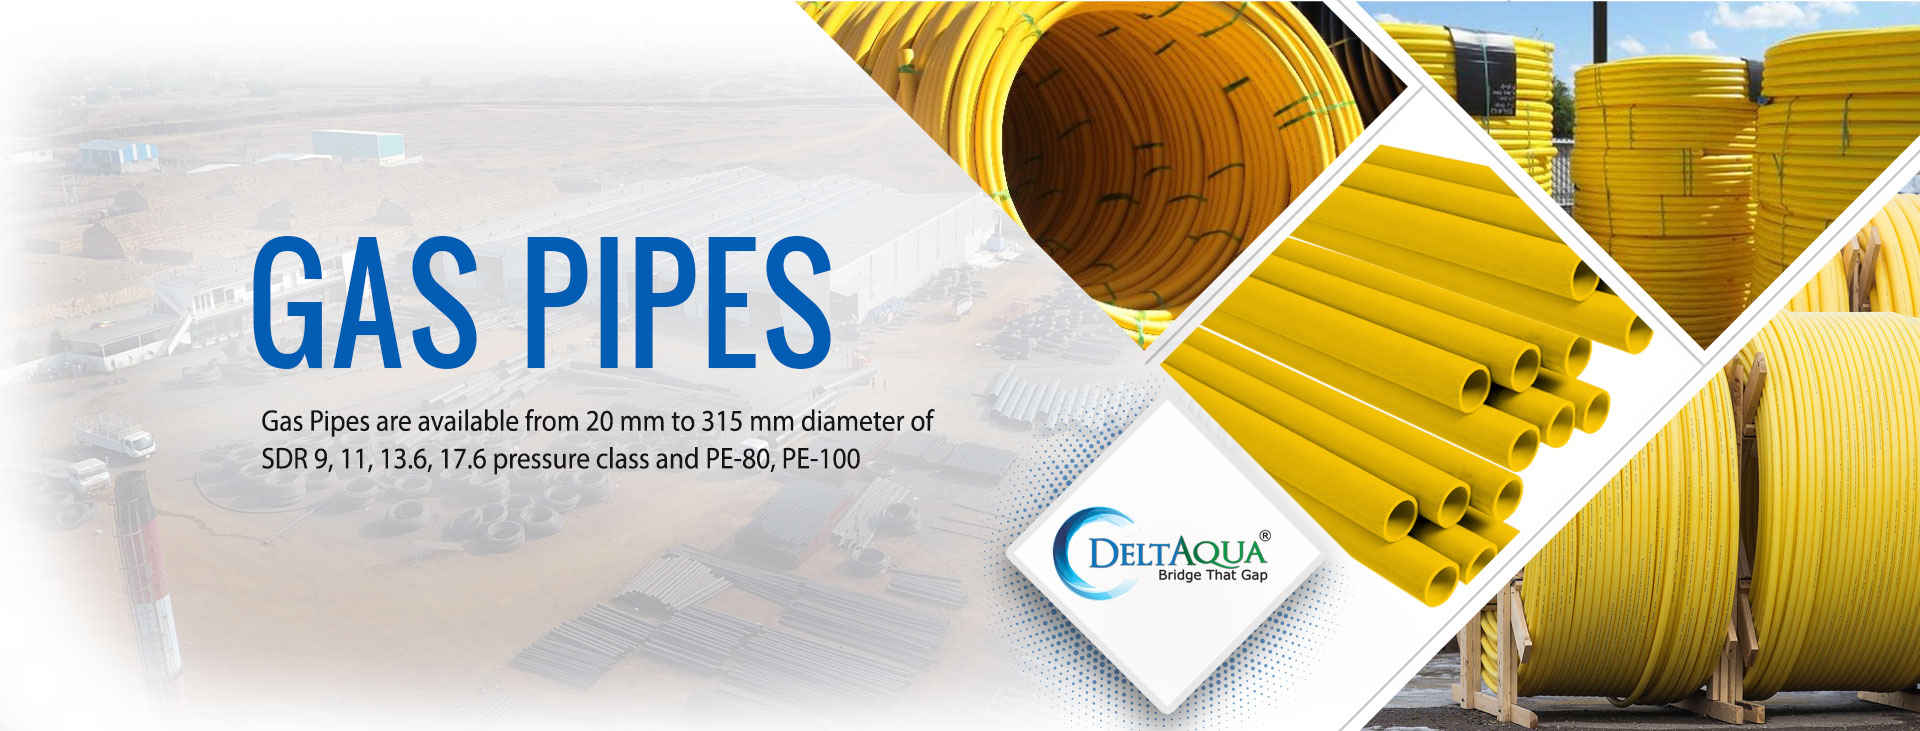 HDPE Gas Pipe Manufacturer in India